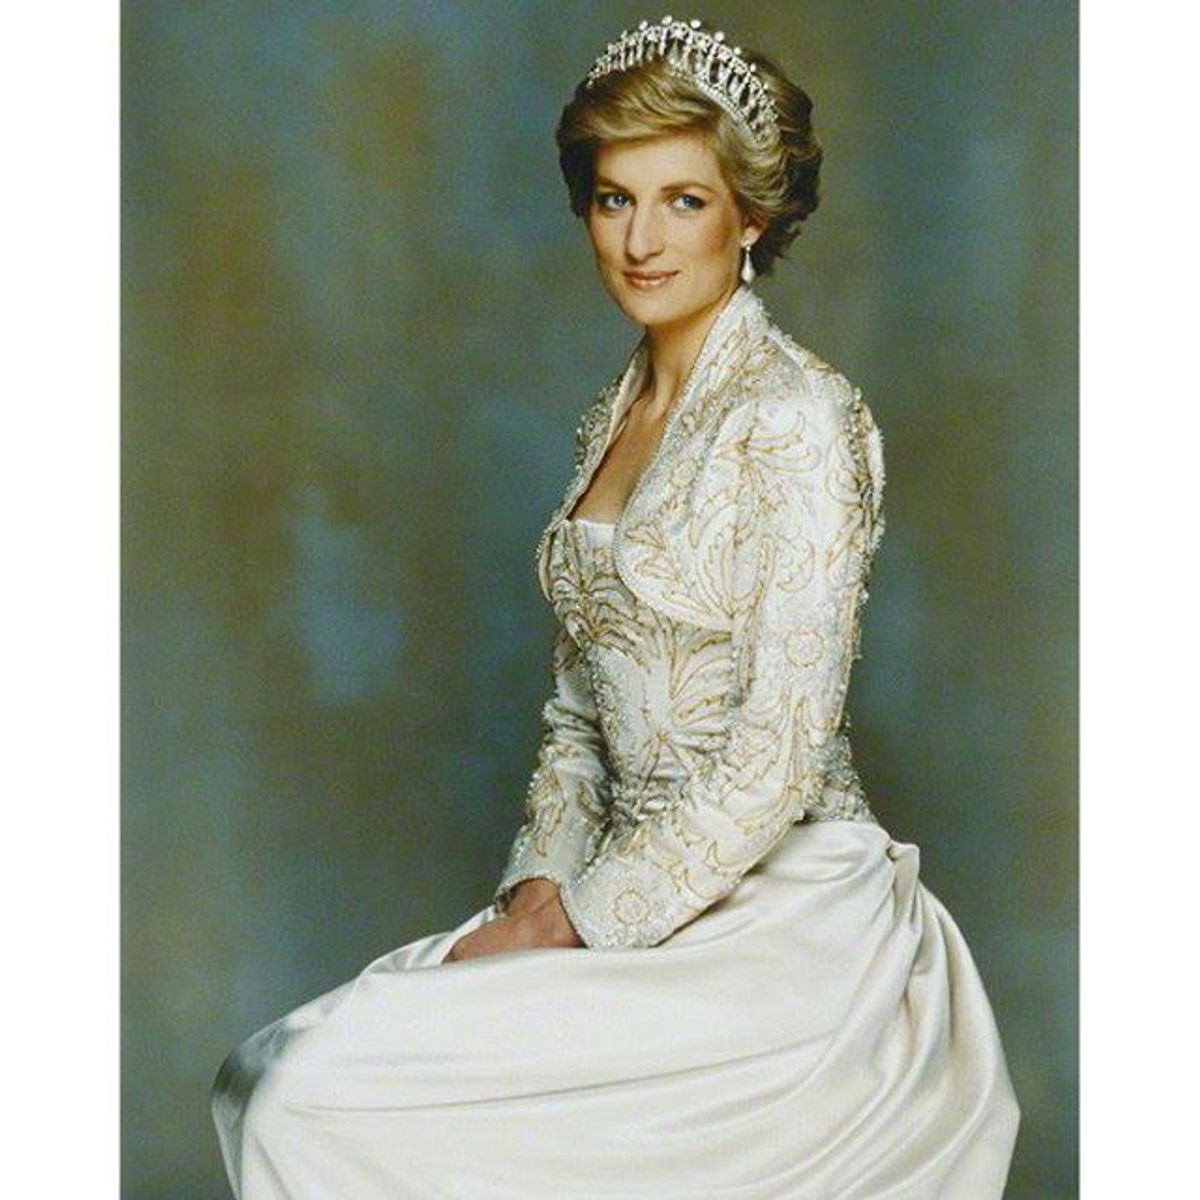 A Tribute To Diana, Princess Of Wales